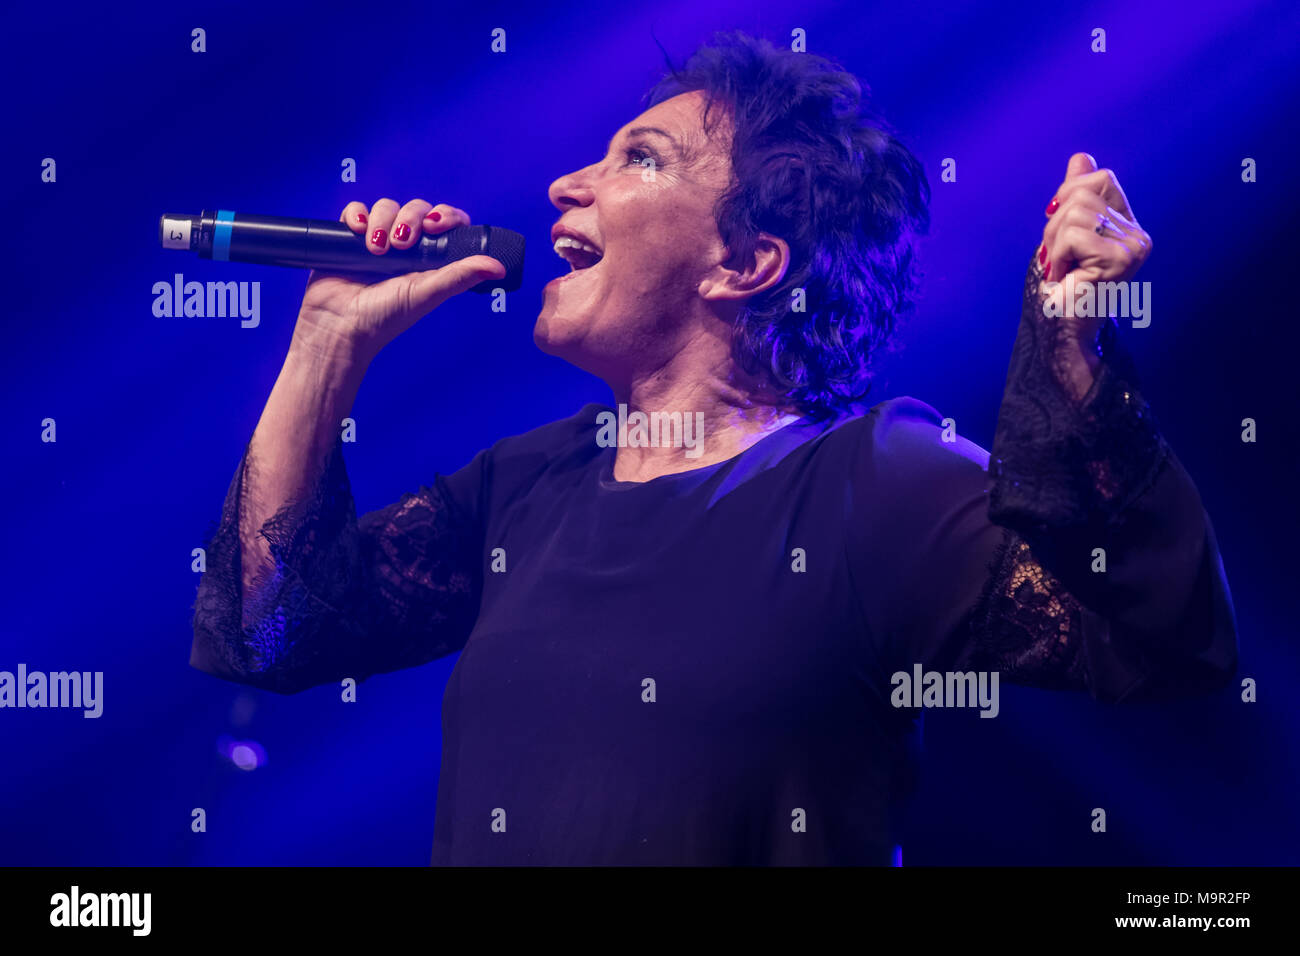 The Italian pop group Ricchi e Poveri with singer Angela Brambati and singer Angelo Sotgiu live at Schlager Nacht, Lucerne Stock Photo